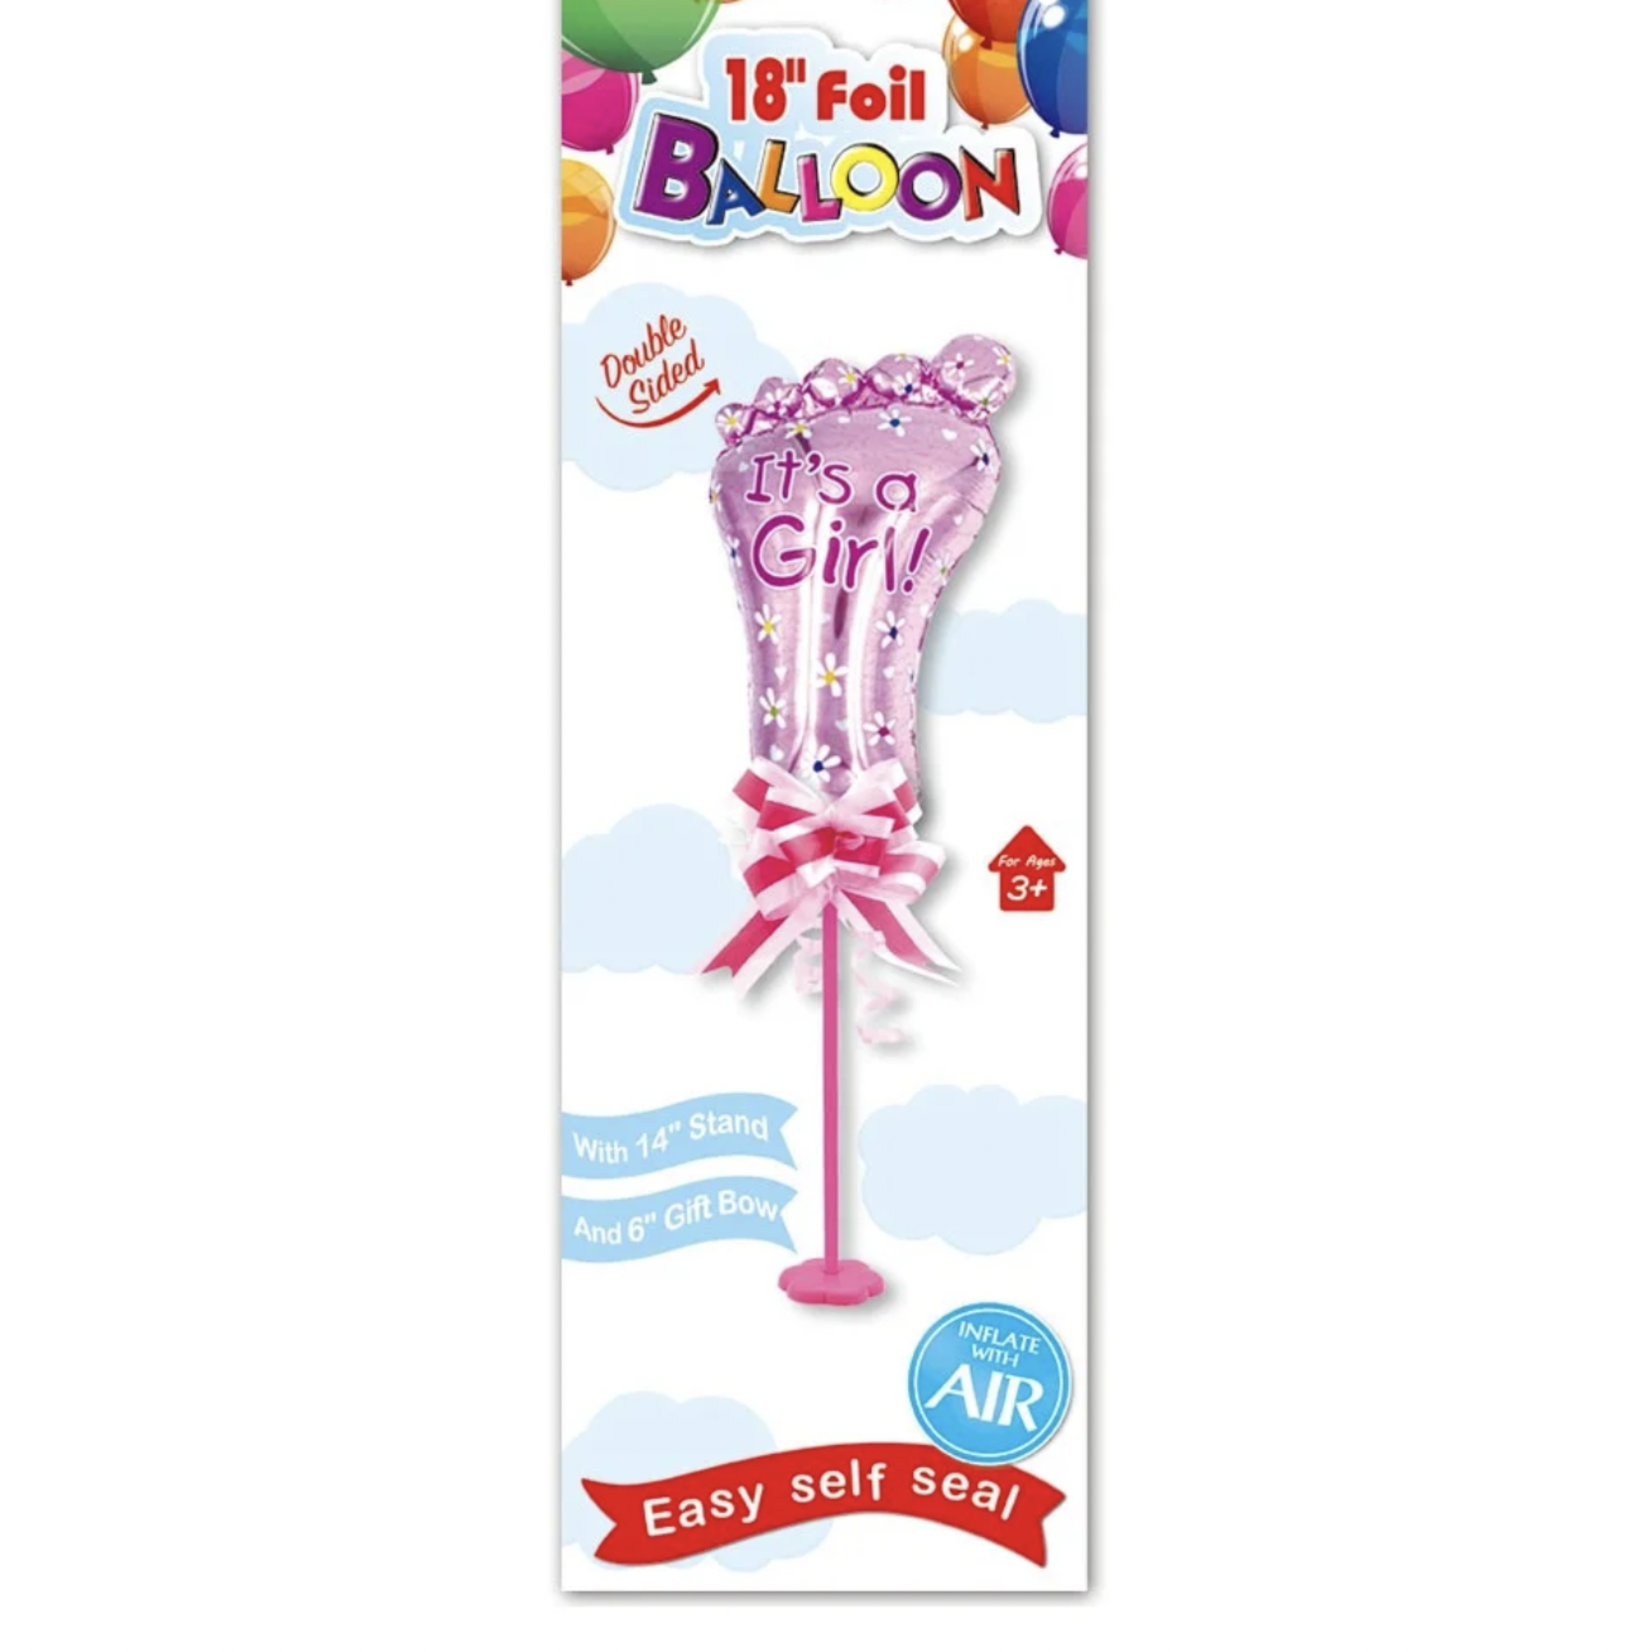 14'' FOIL BALLOON, PINK BABY FOOT ON STAND